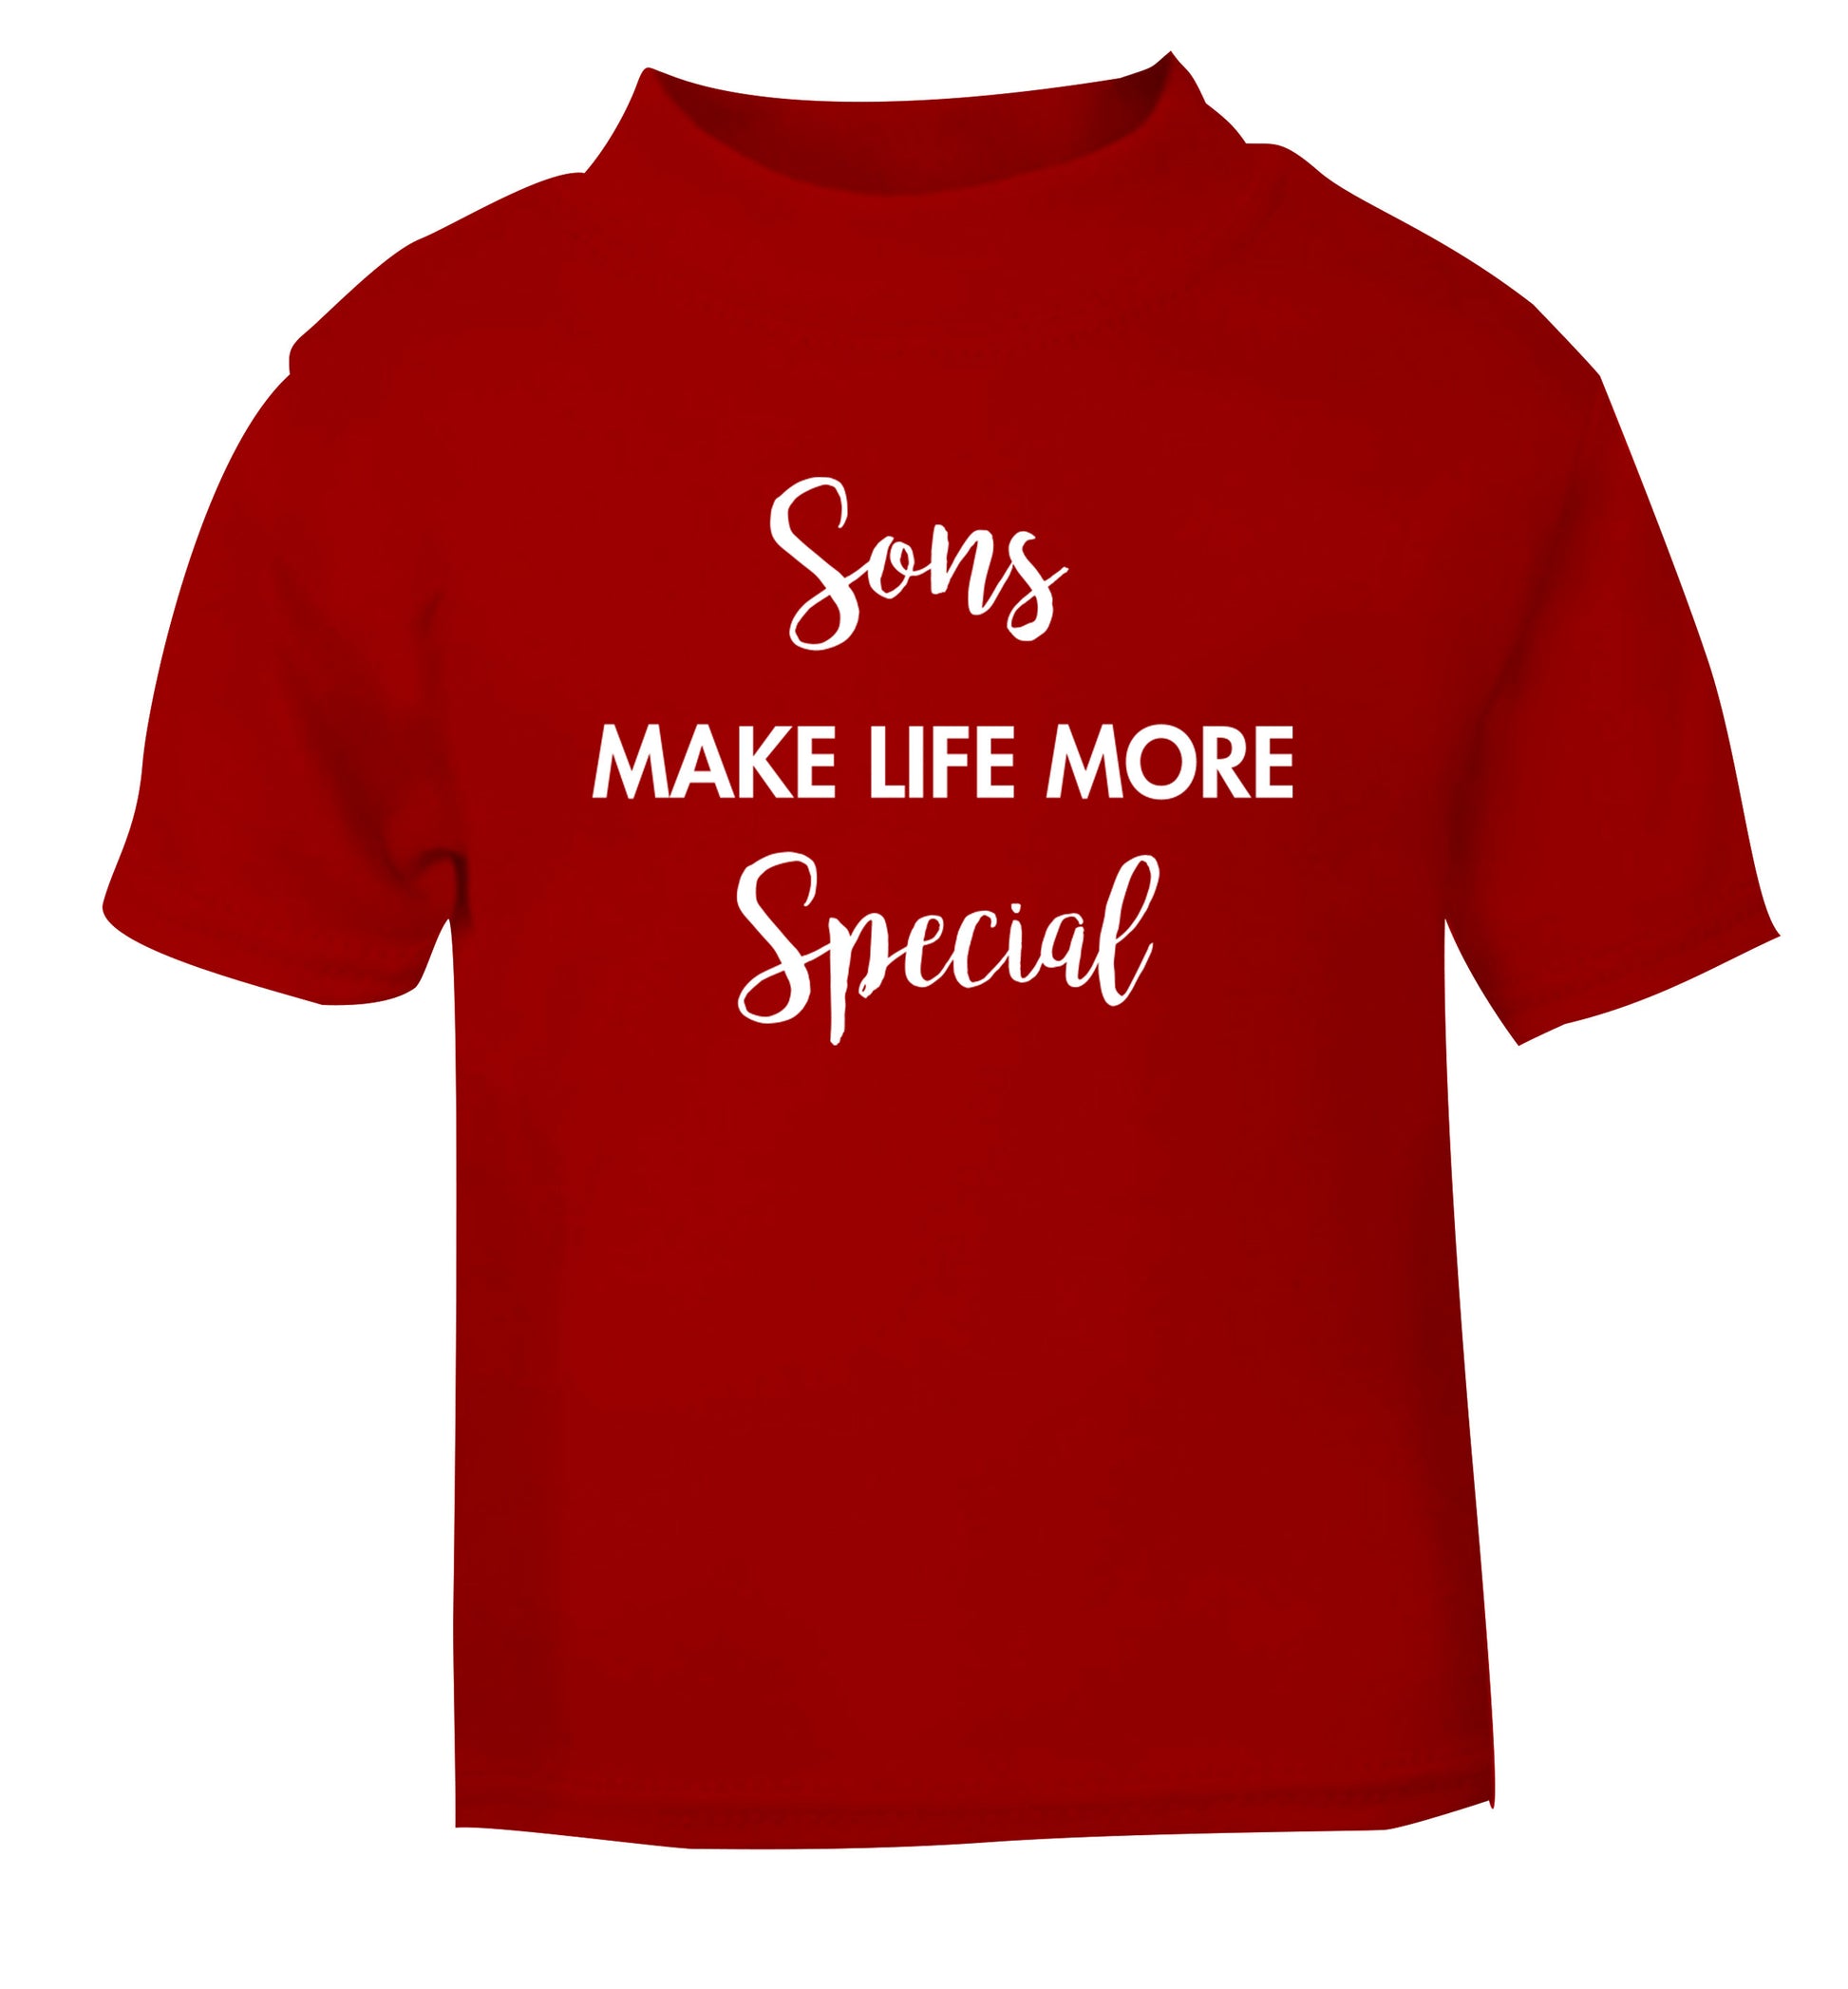 Sons make life more special red Baby Toddler Tshirt 2 Years